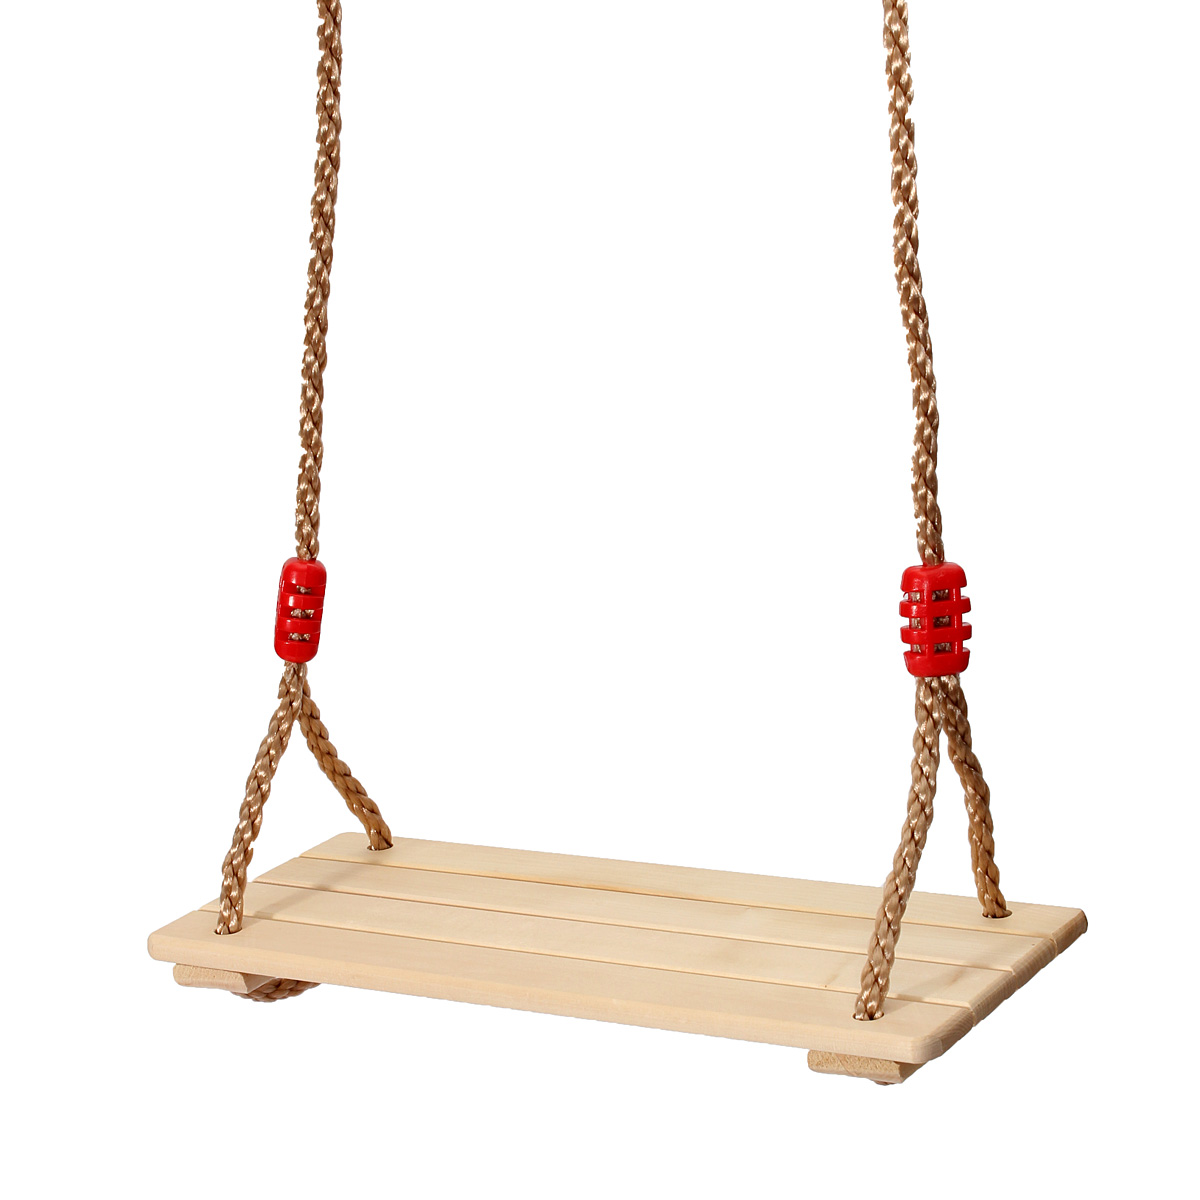 KING-DO-WAY-Outdoor-Wooden-Swing-Seat-Hanging-Chair-Porch-Swing-Camping-Garden-Patio-for-Children-935371-3